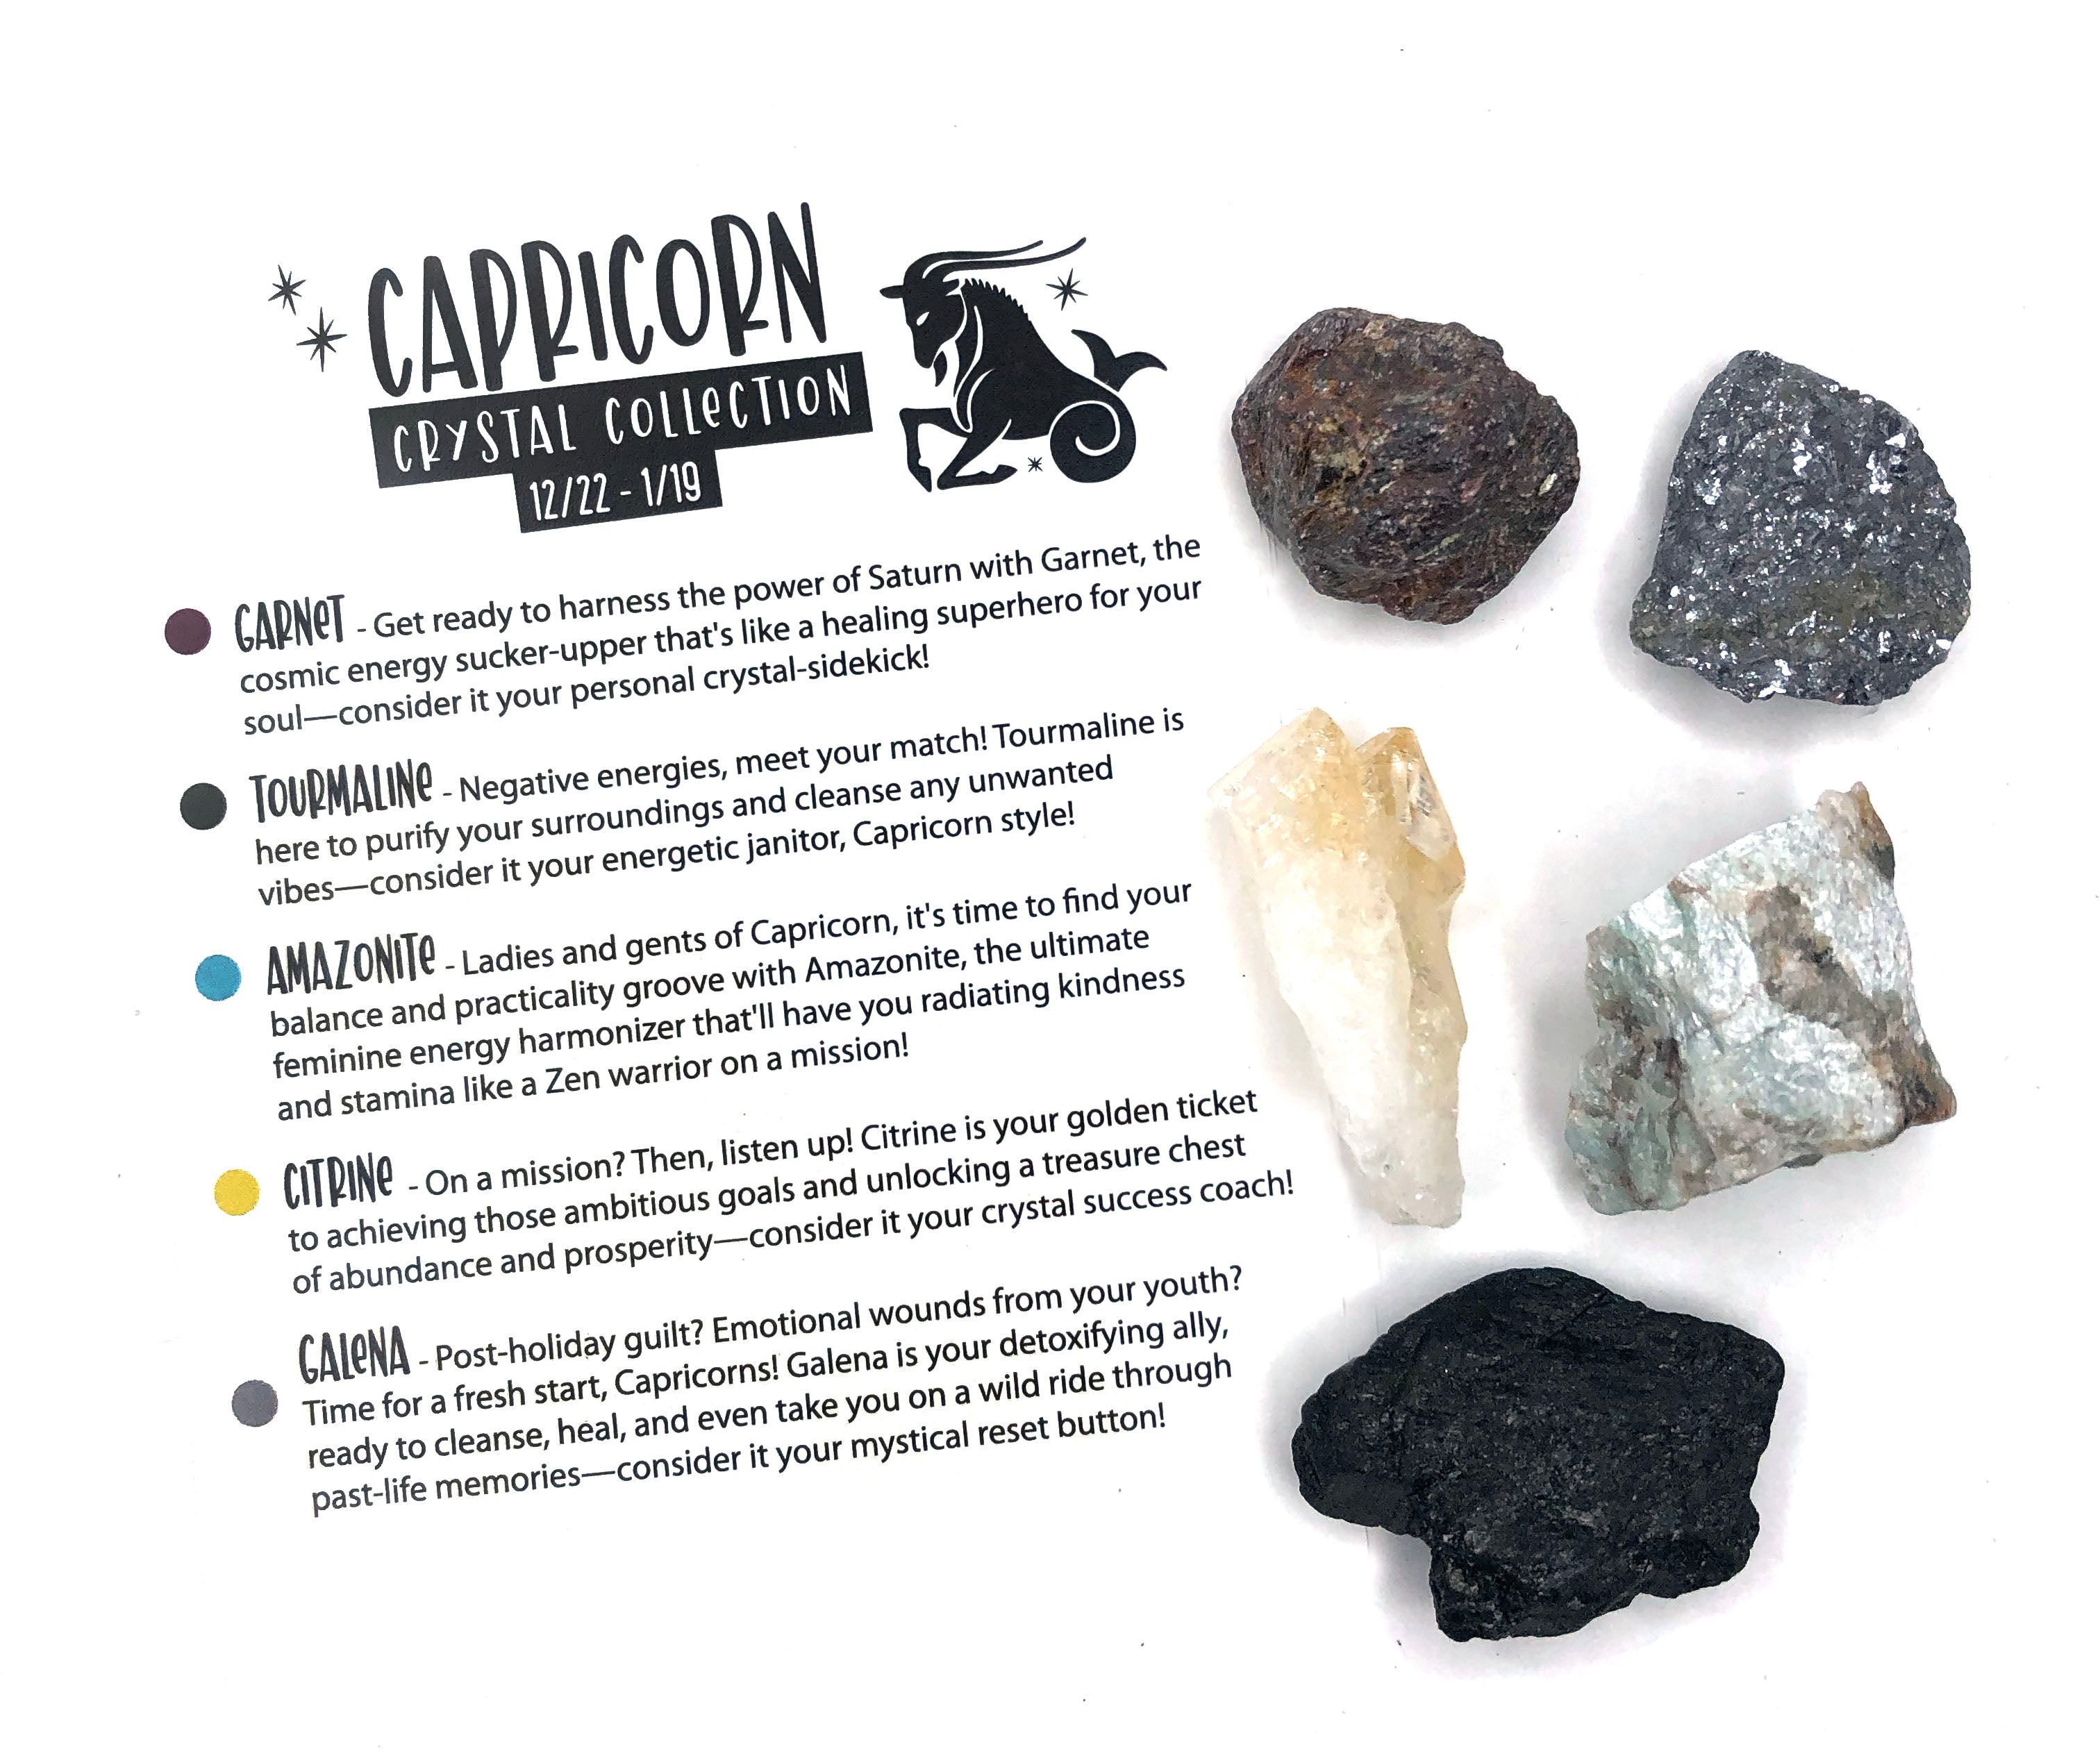 CAPRICORN Crystal Collection